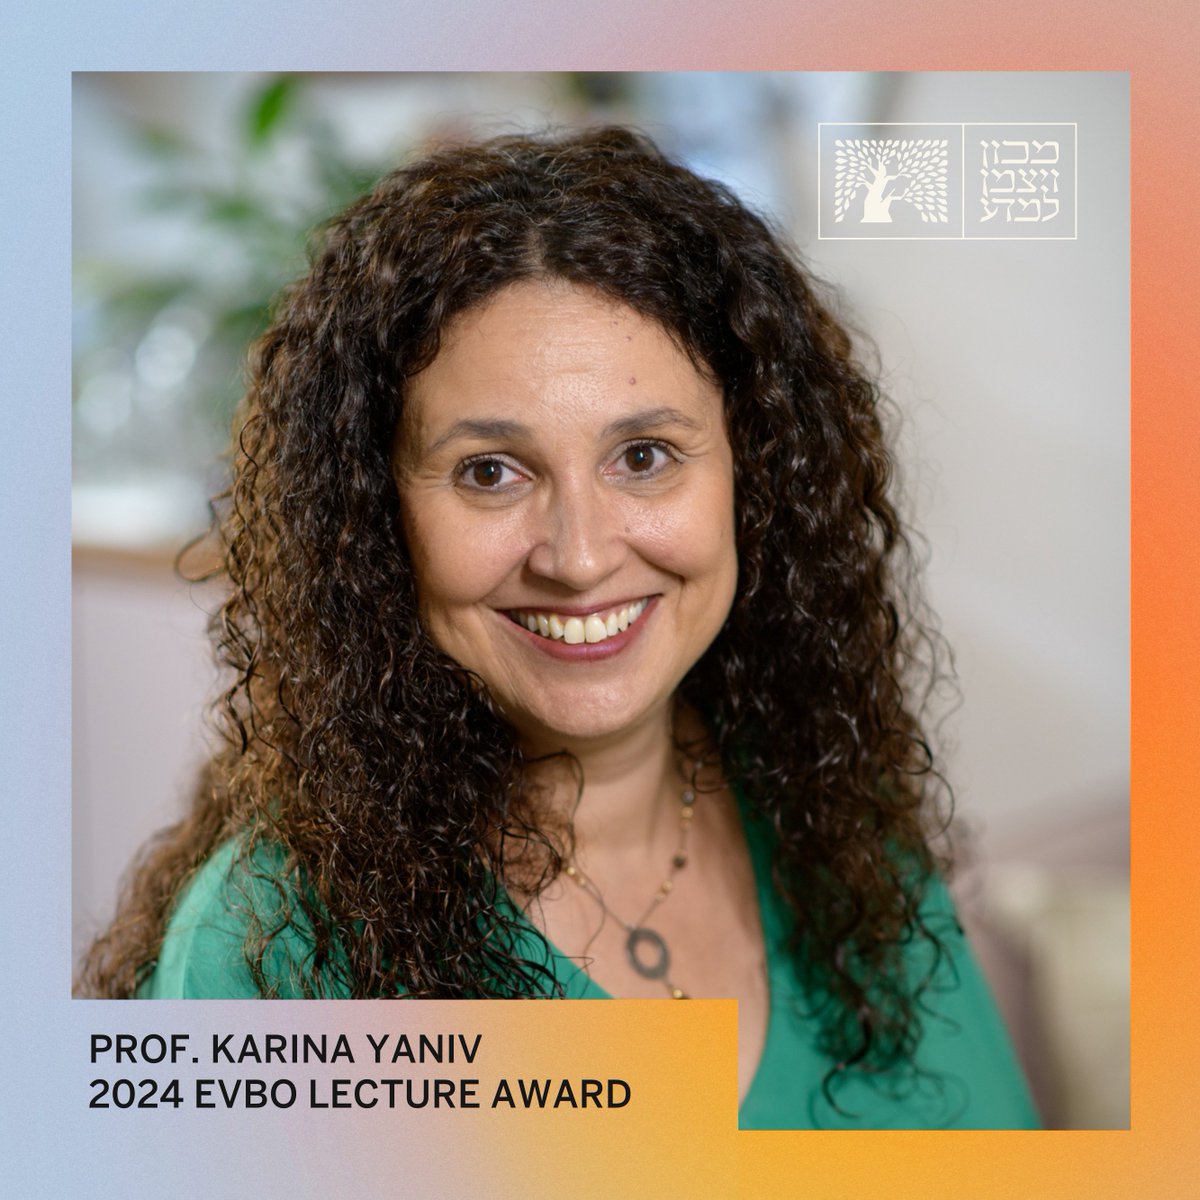 Congratulations to Prof. @KarinaYaniv of the Immunology and Regenerative Biology Department upon receiving the 2024 European Vascular Biology Organization (EVBO) Lecture Award.